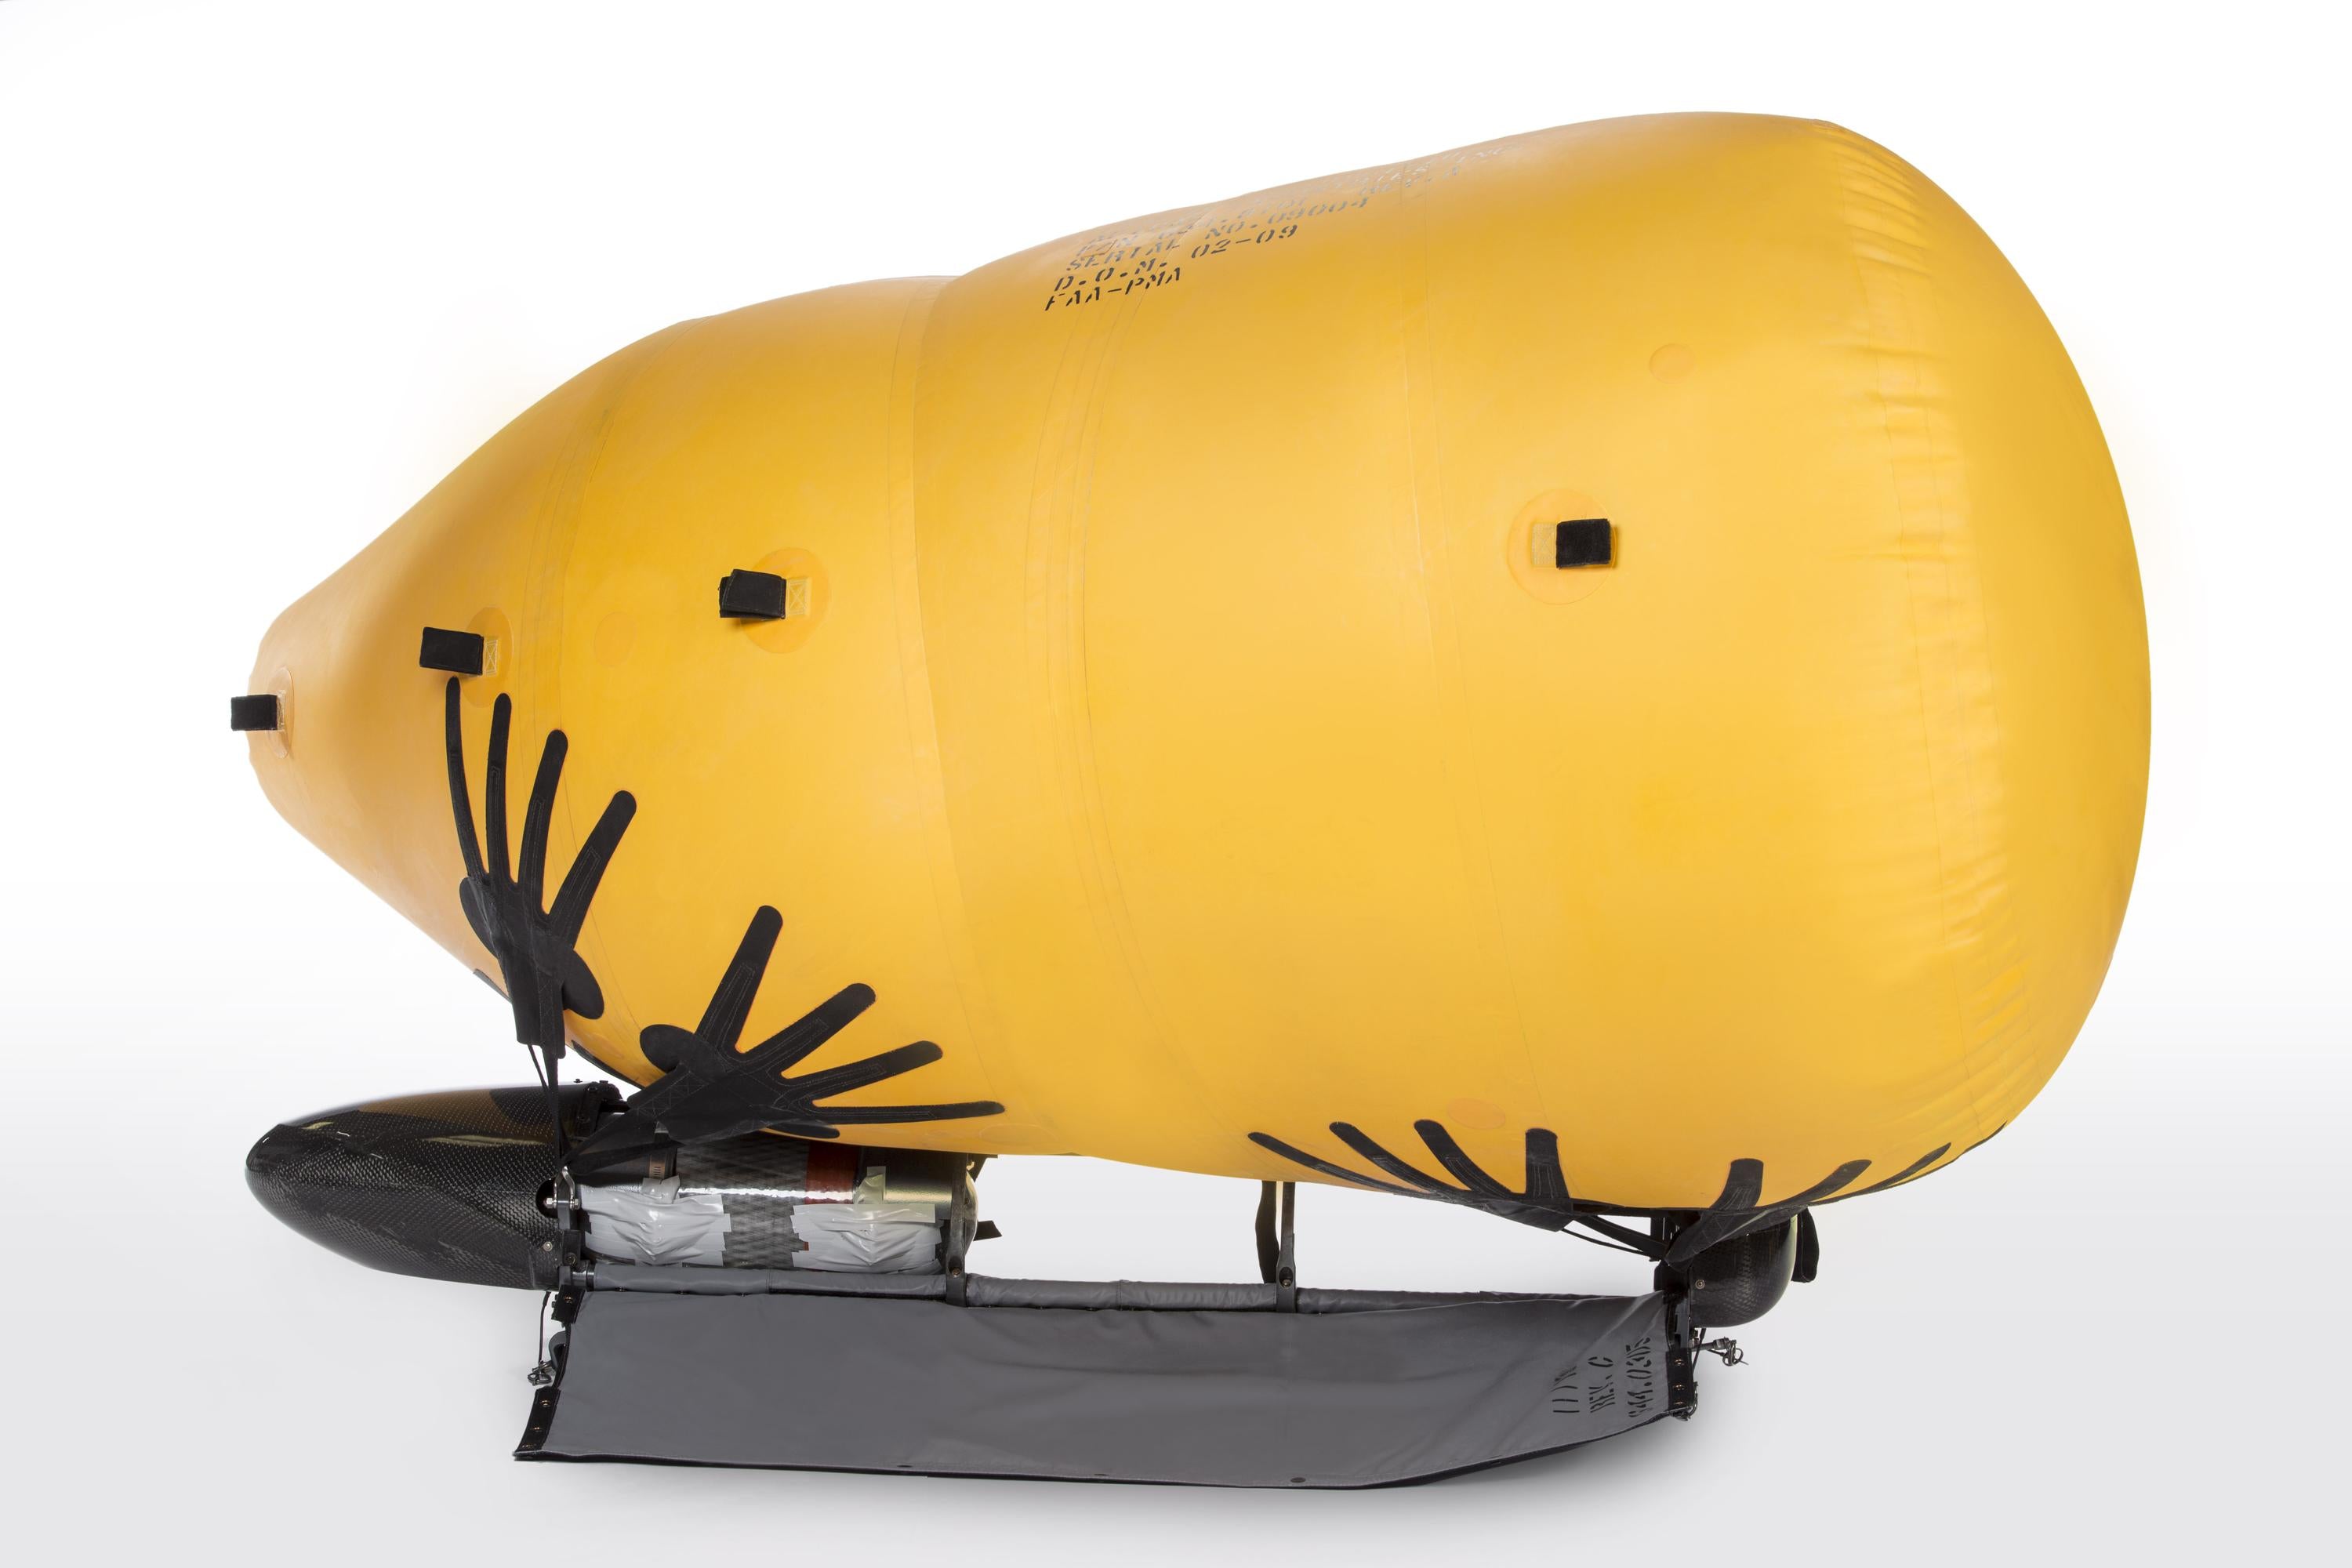 AW109SP emergency float system with integrated liferafts 